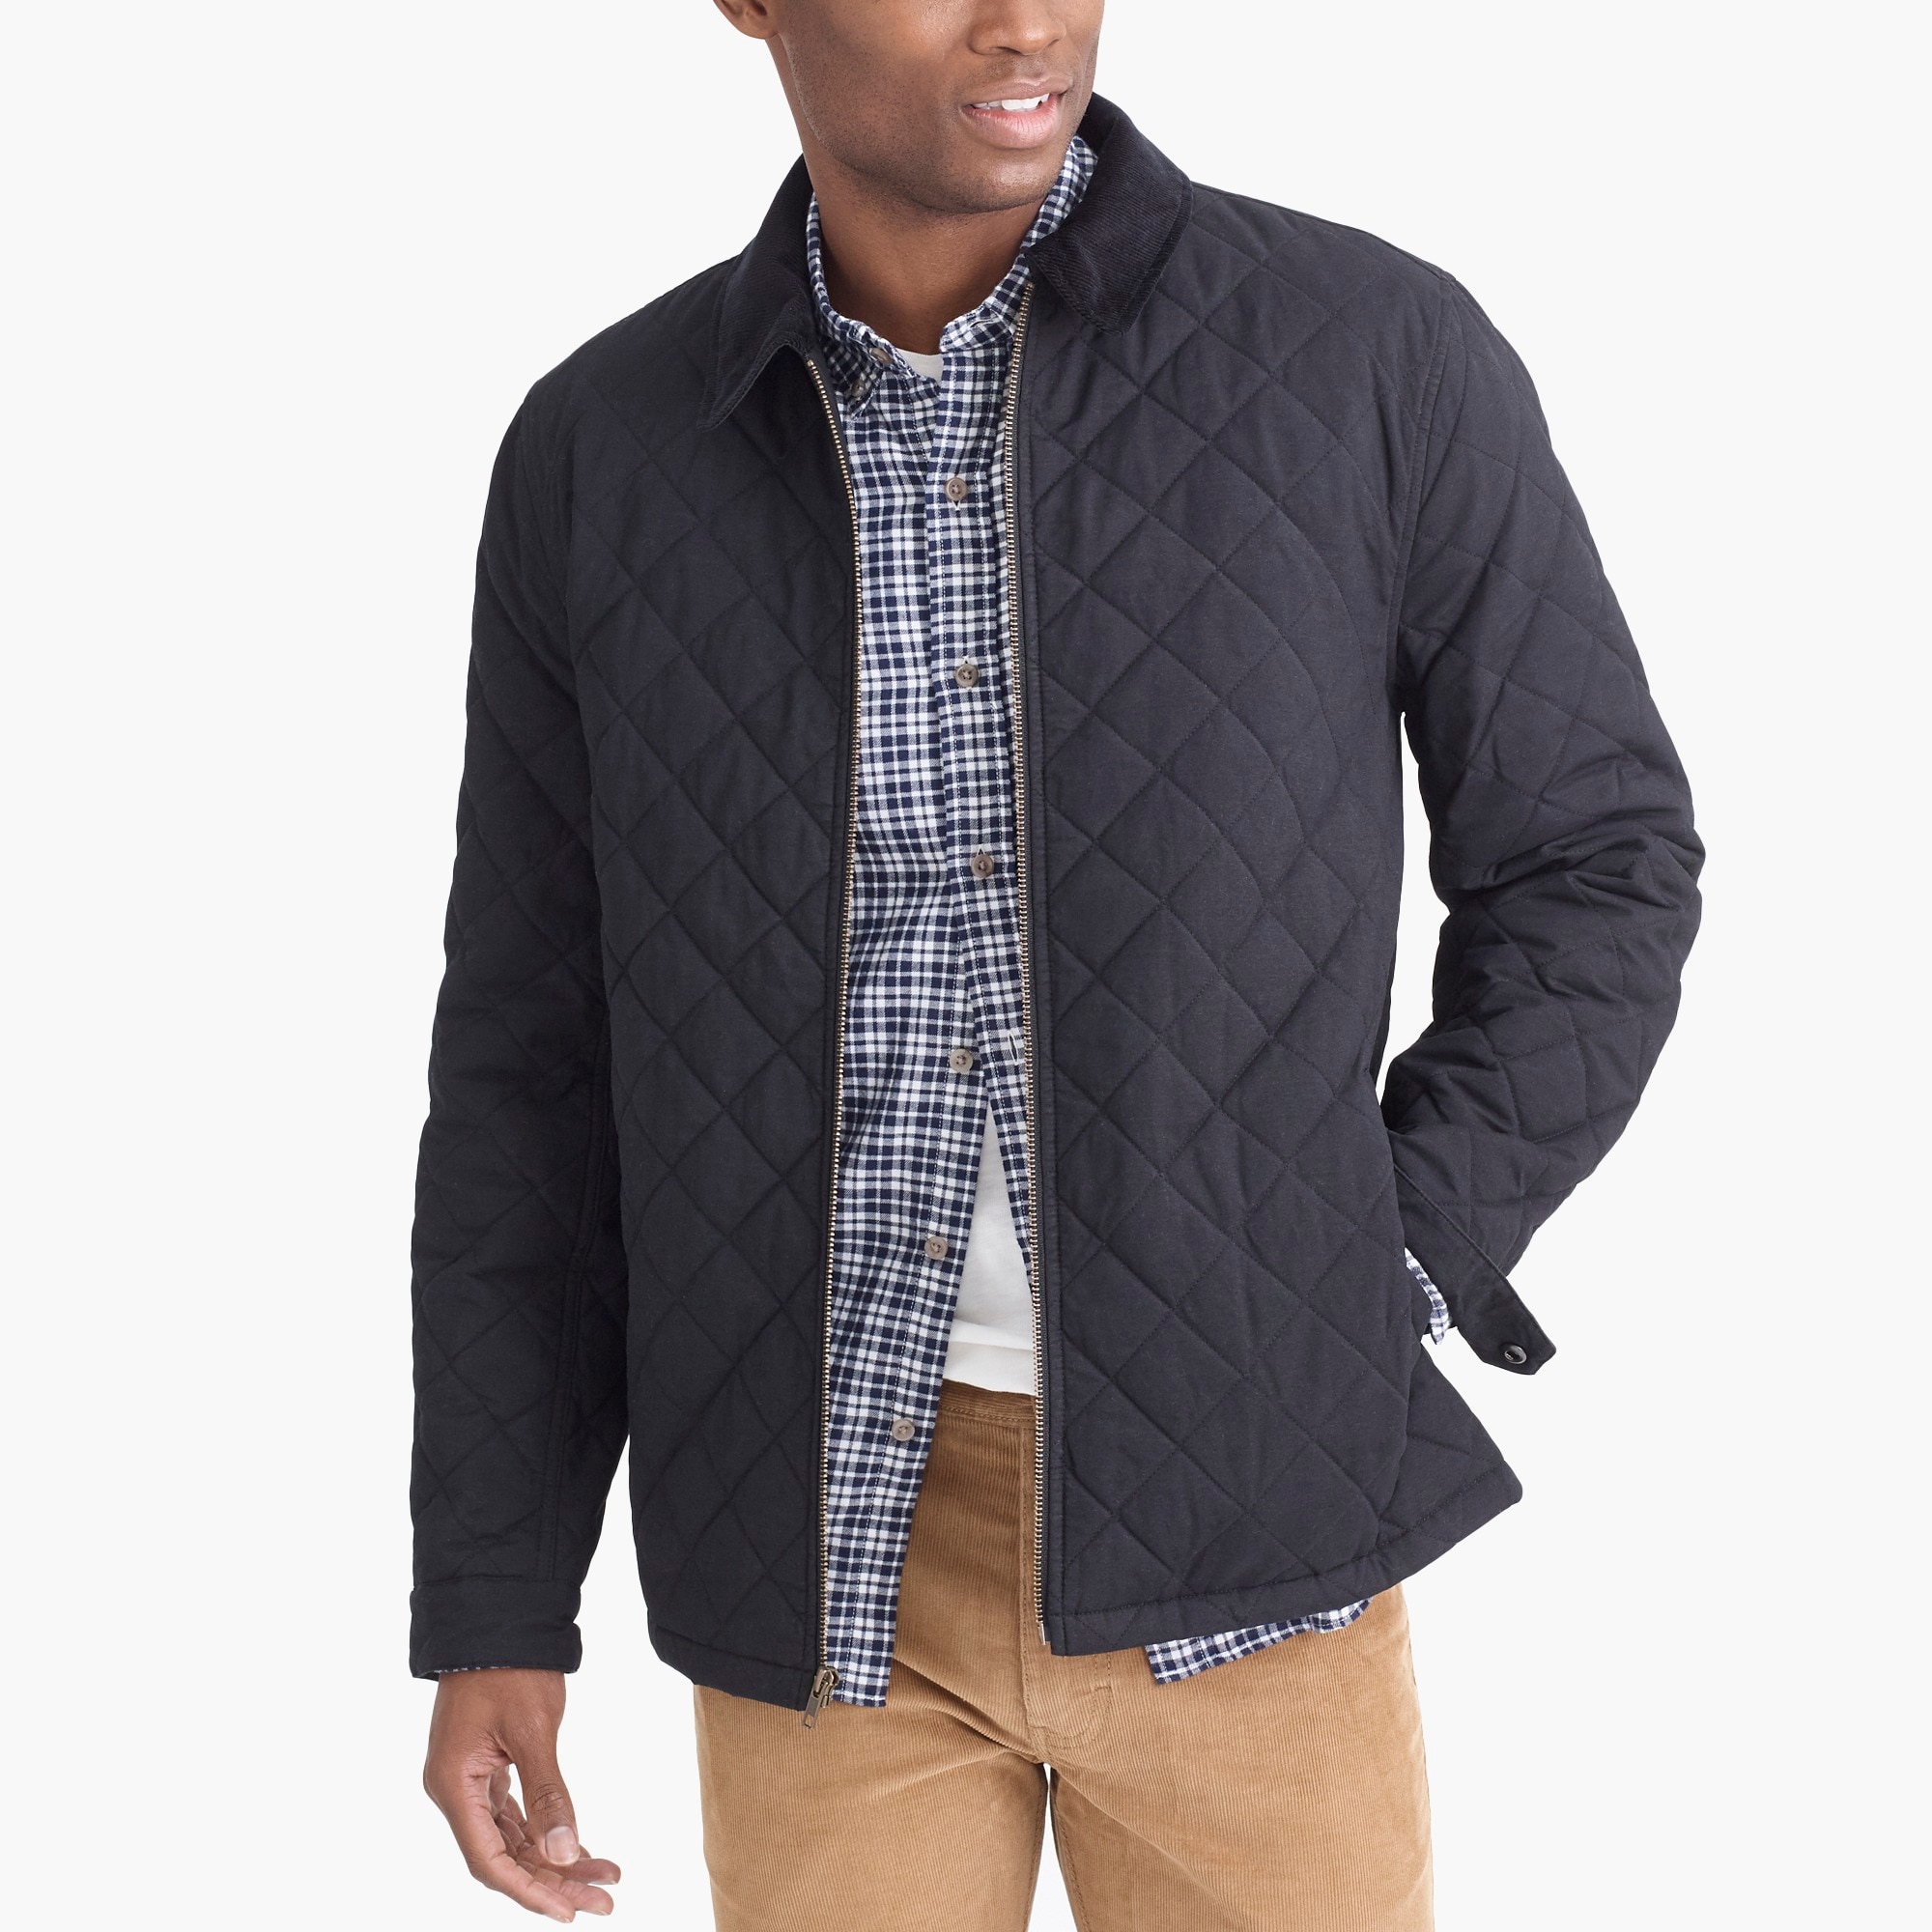 Quilted jacket : FactoryMen Jackets | Factory